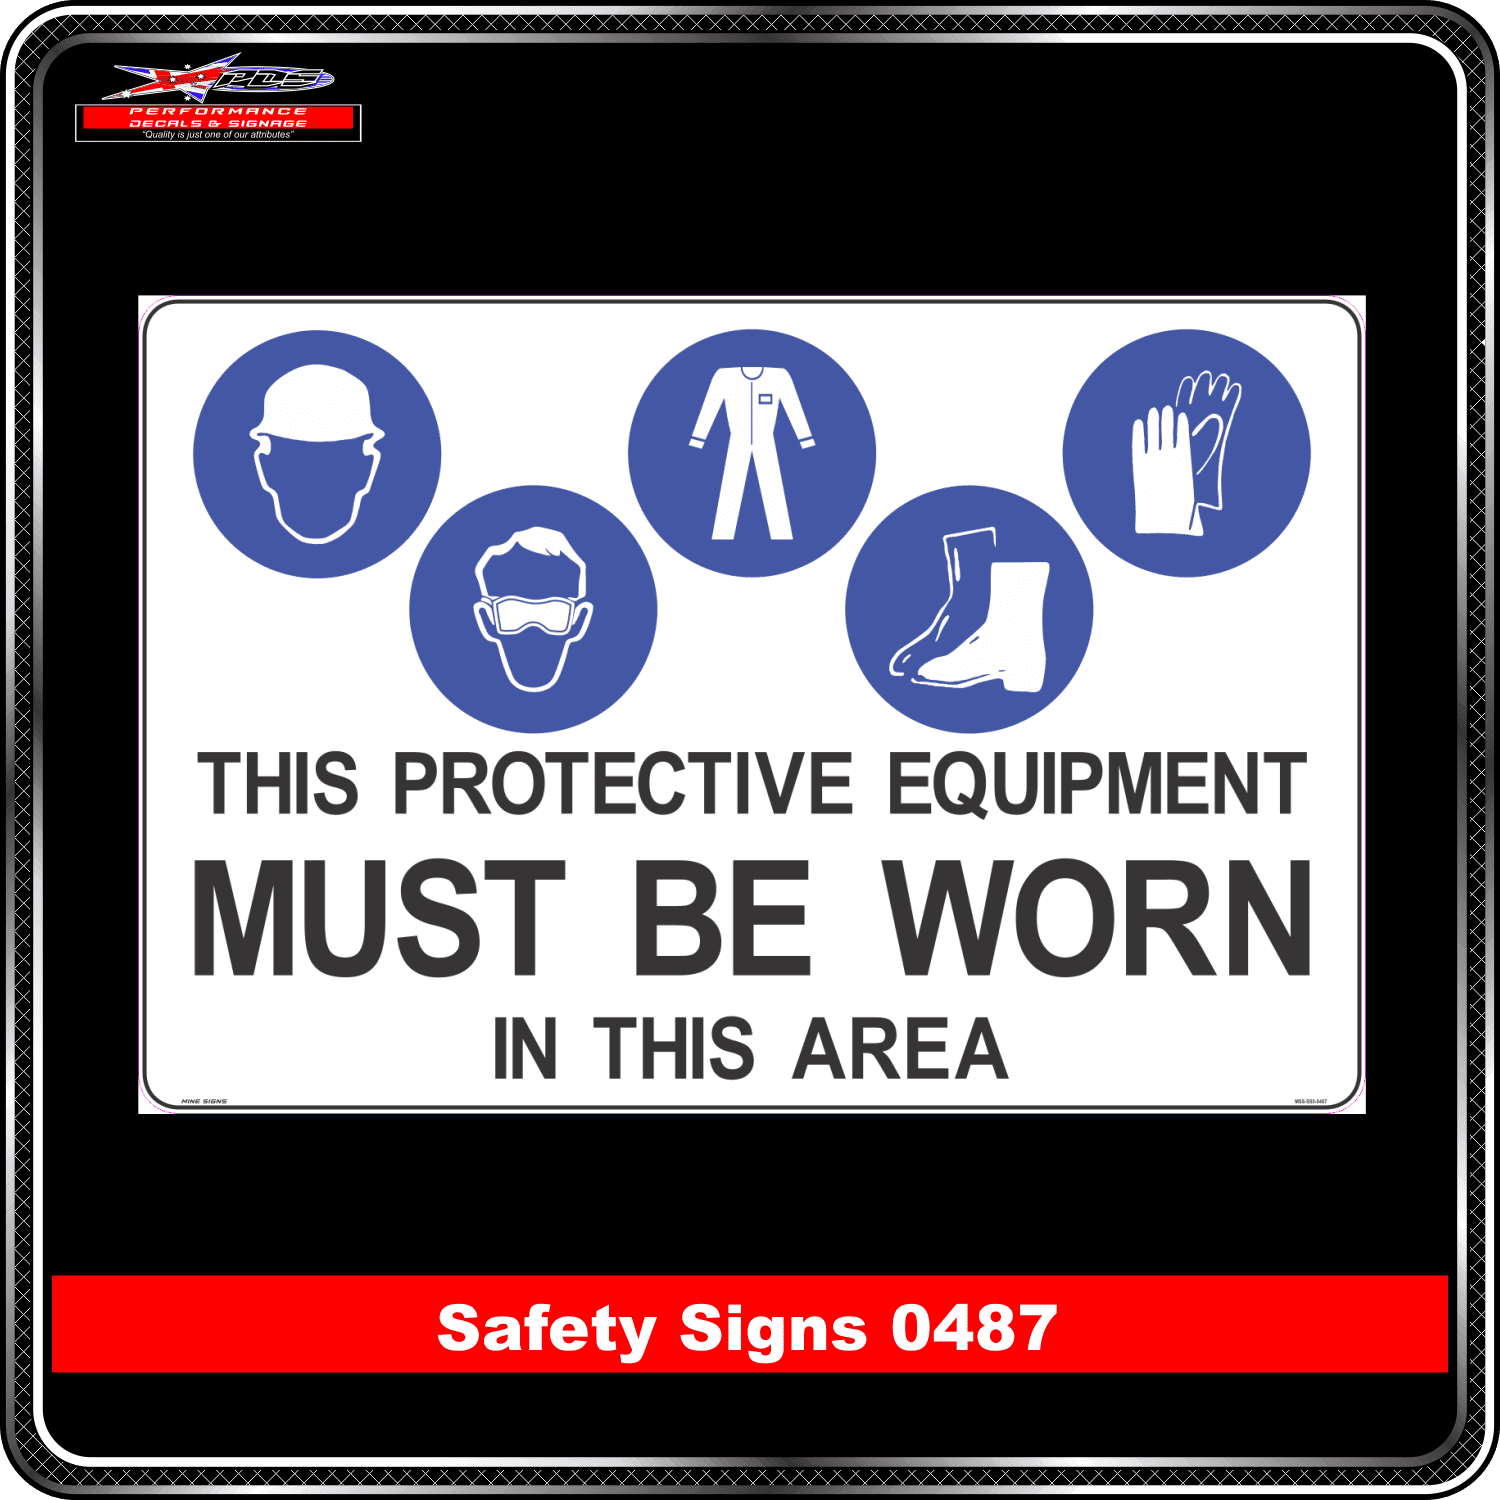 Protective clothing must be worn safety sign Vector Image